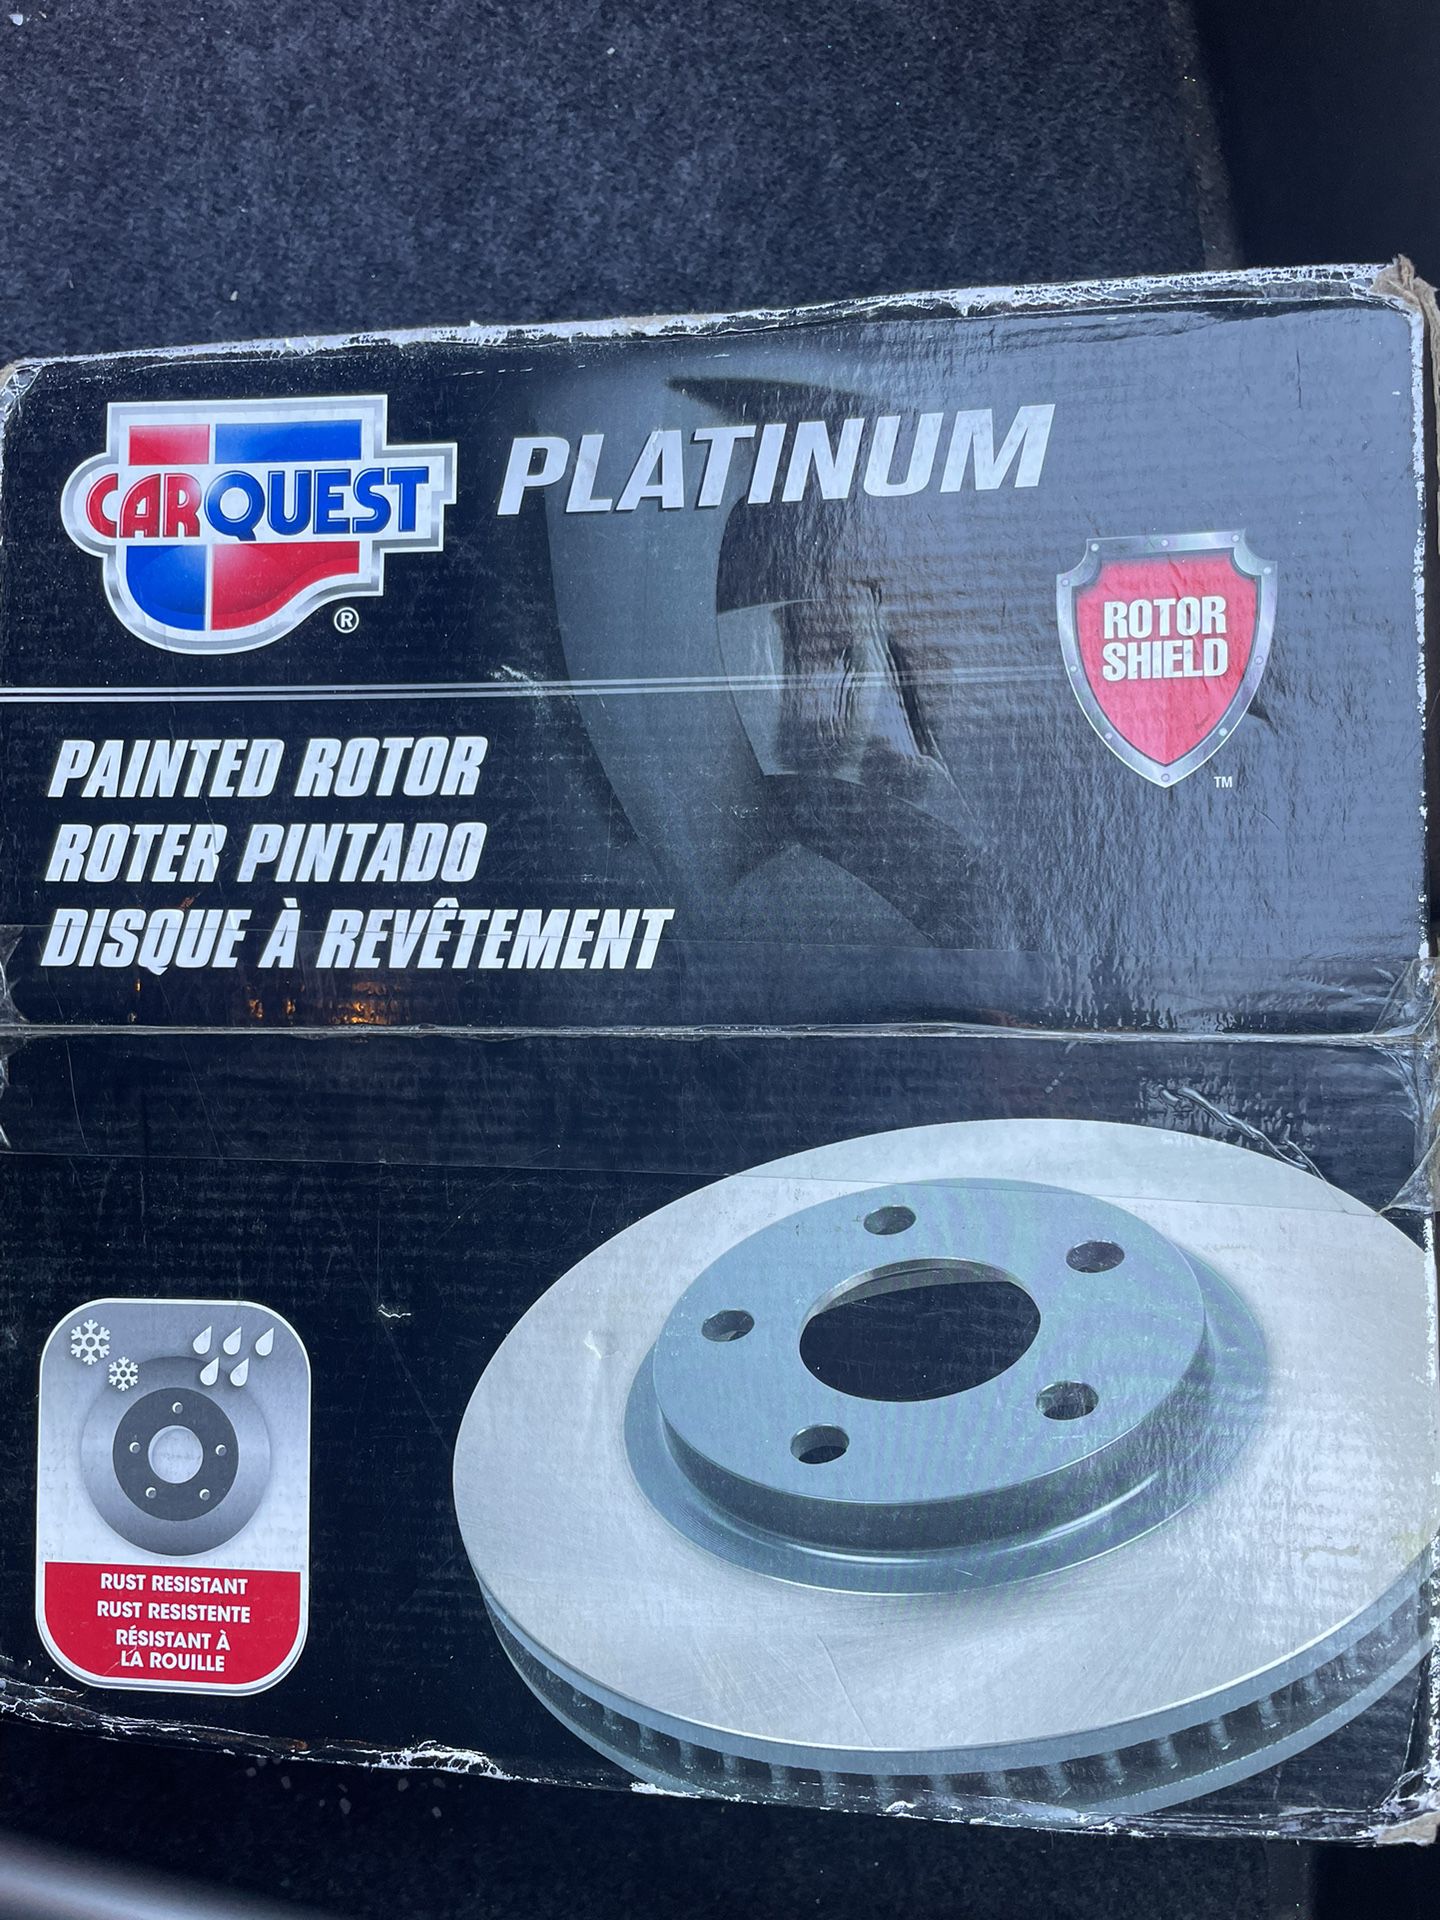 Two brand new rotors